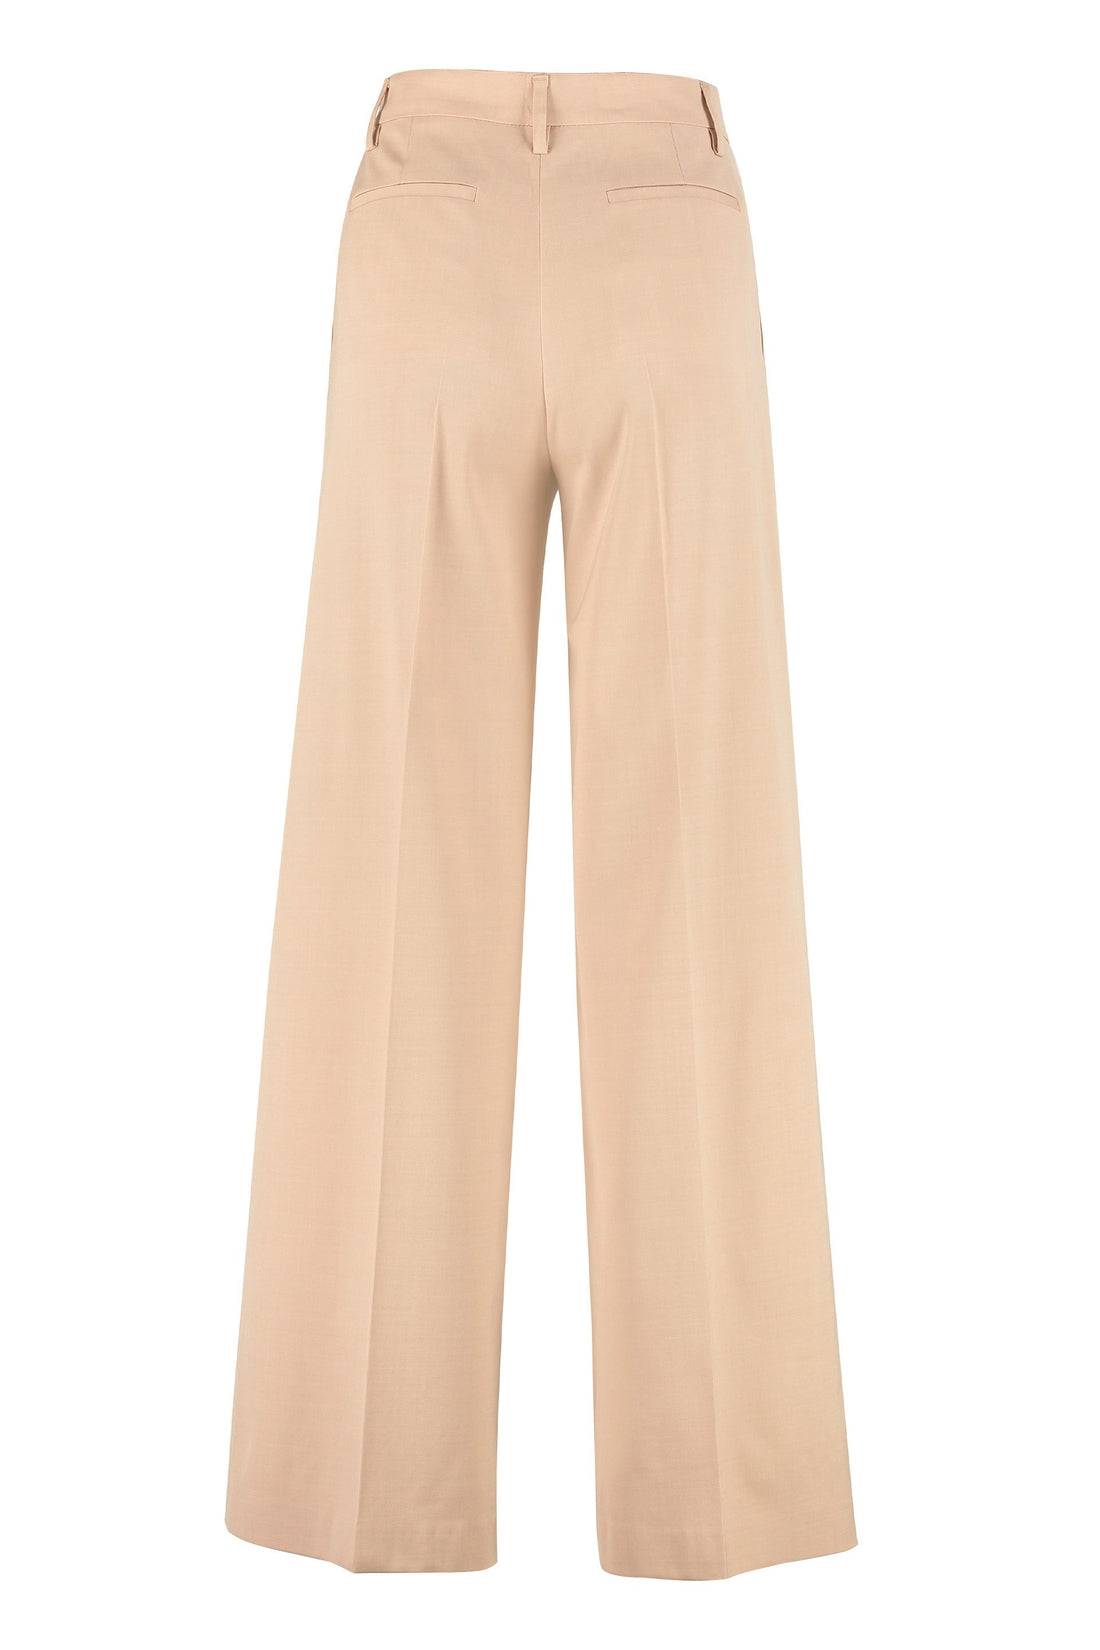 RED VALENTINO-OUTLET-SALE-Wide leg trousers-ARCHIVIST